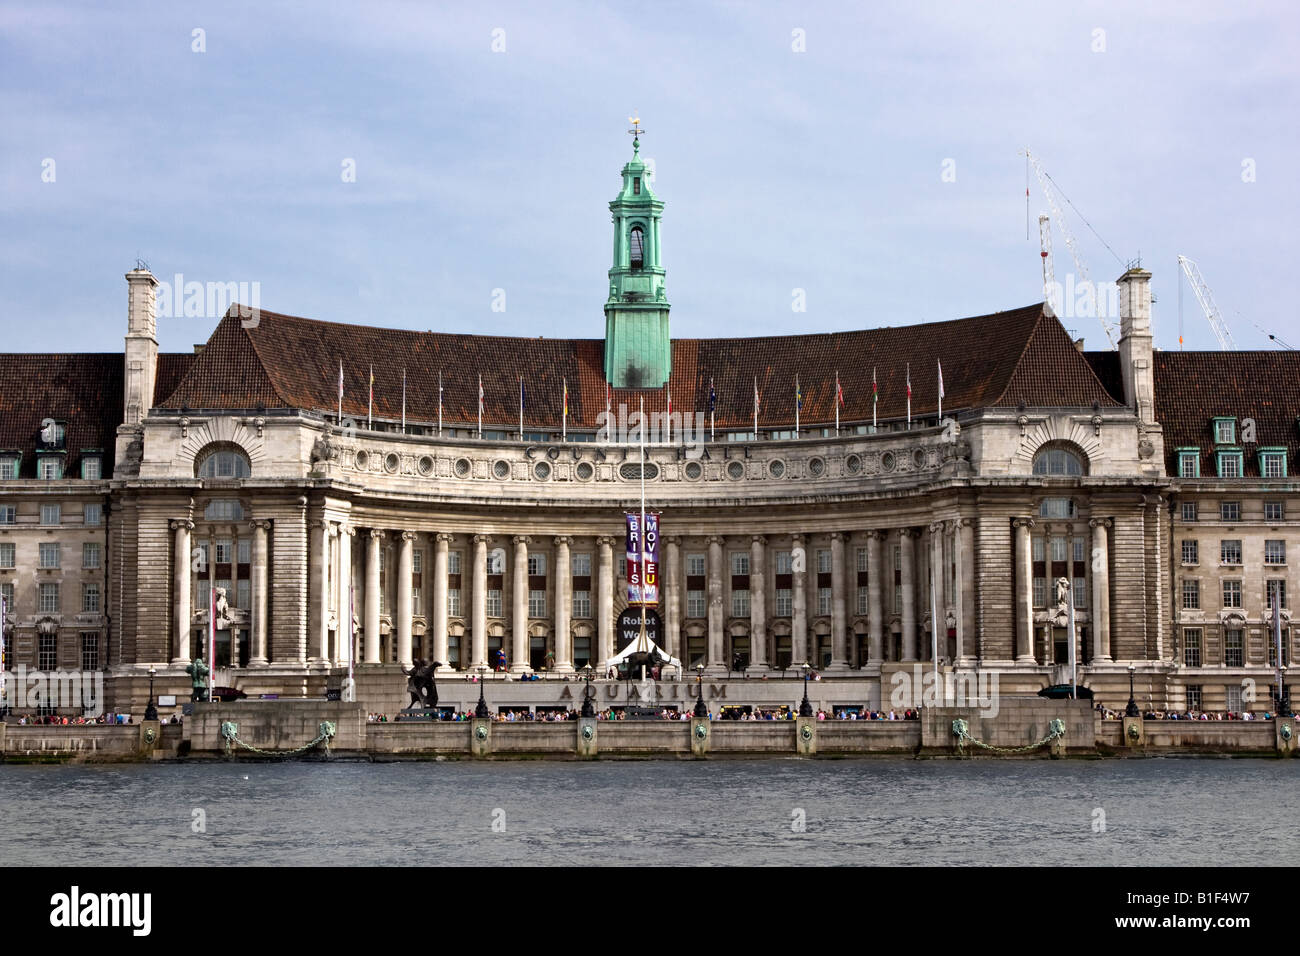 County Hall Art Museum on the Thames River, London England Stock Photo